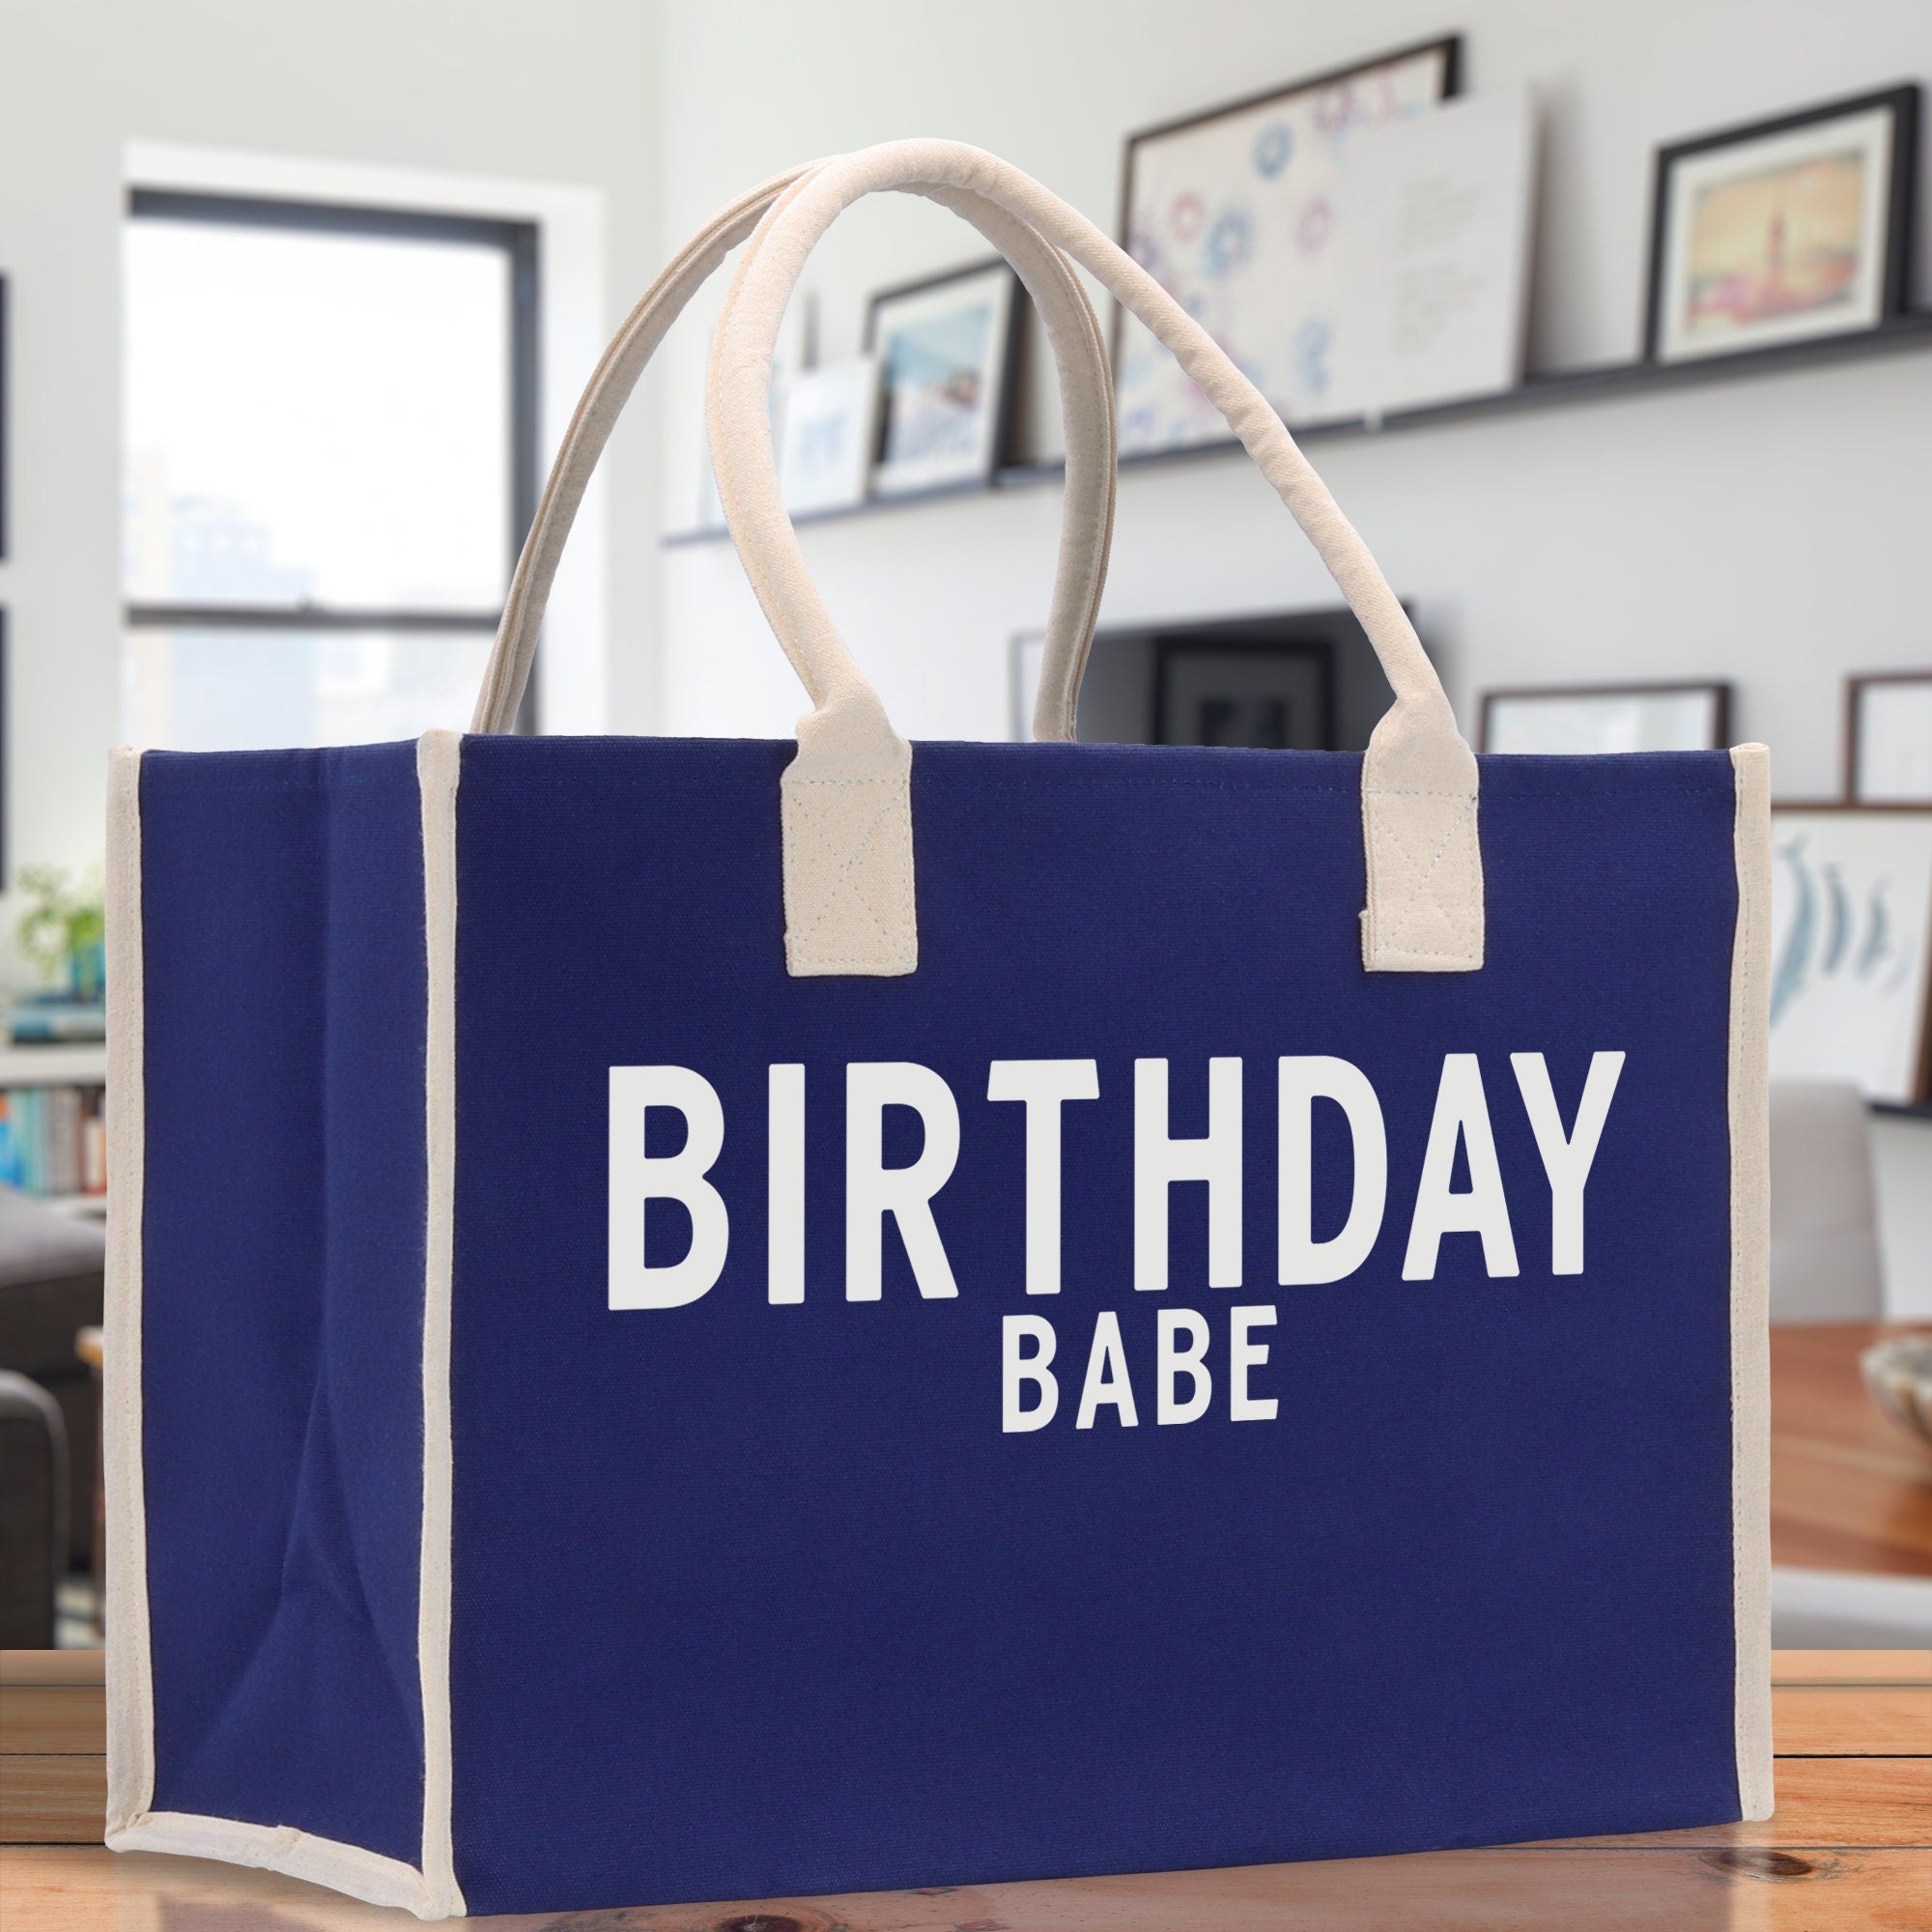 Birthday Babe Cotton Canvas Chic Beach Tote Bag Multipurpose Tote Weekender Tote Gift for Her Outdoor Tote Vacation Tote Large Beach Bag